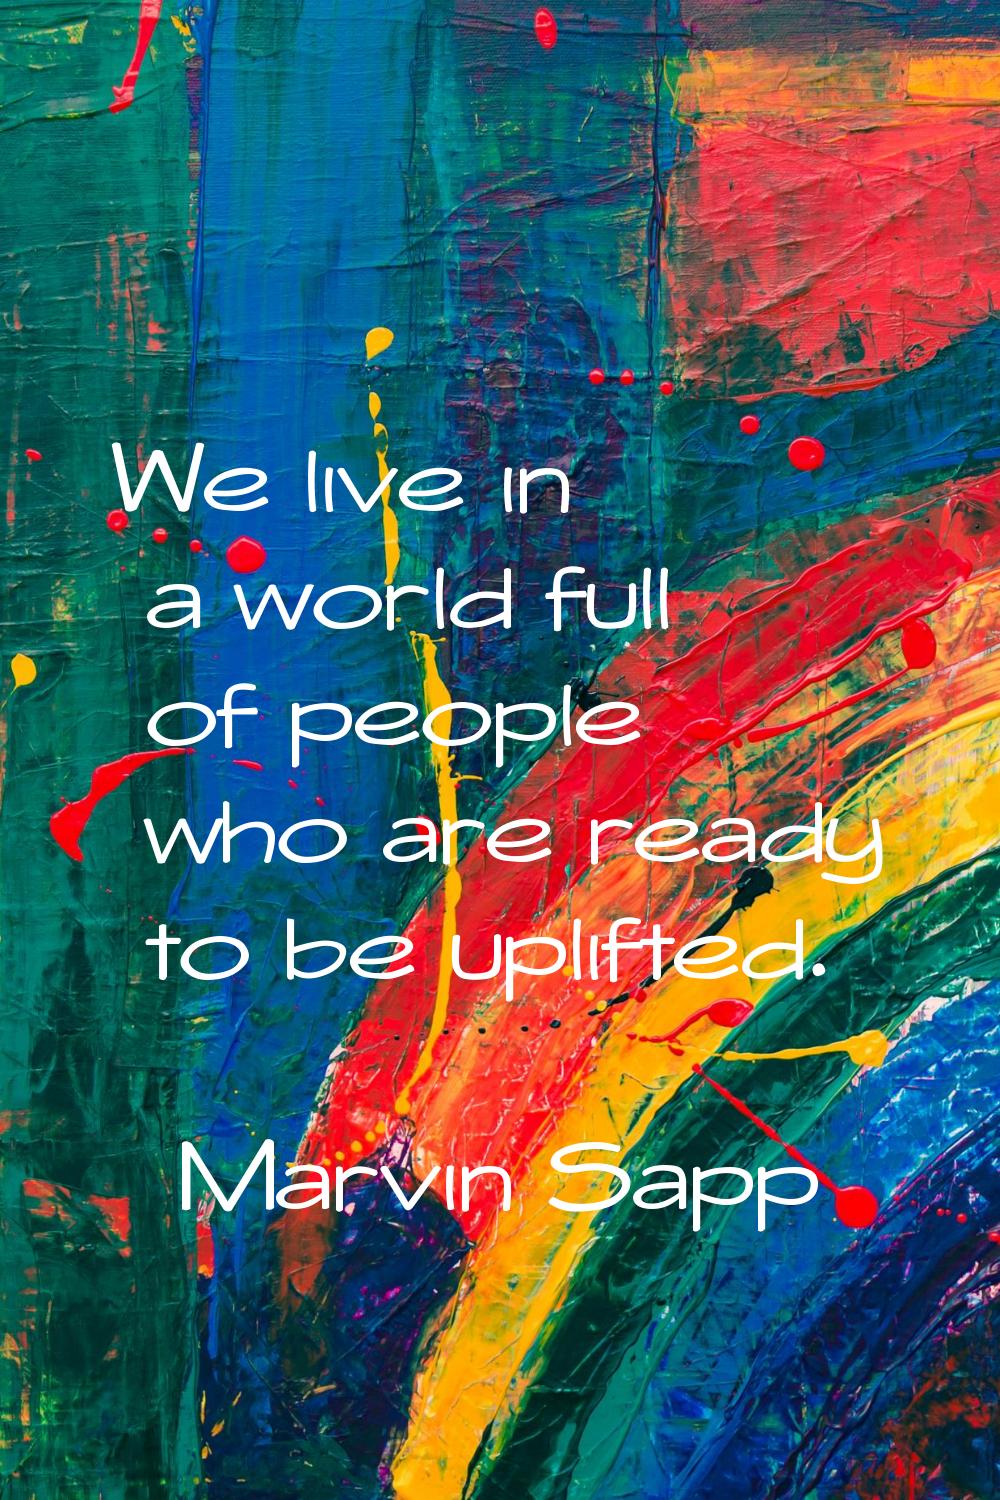 We live in a world full of people who are ready to be uplifted.